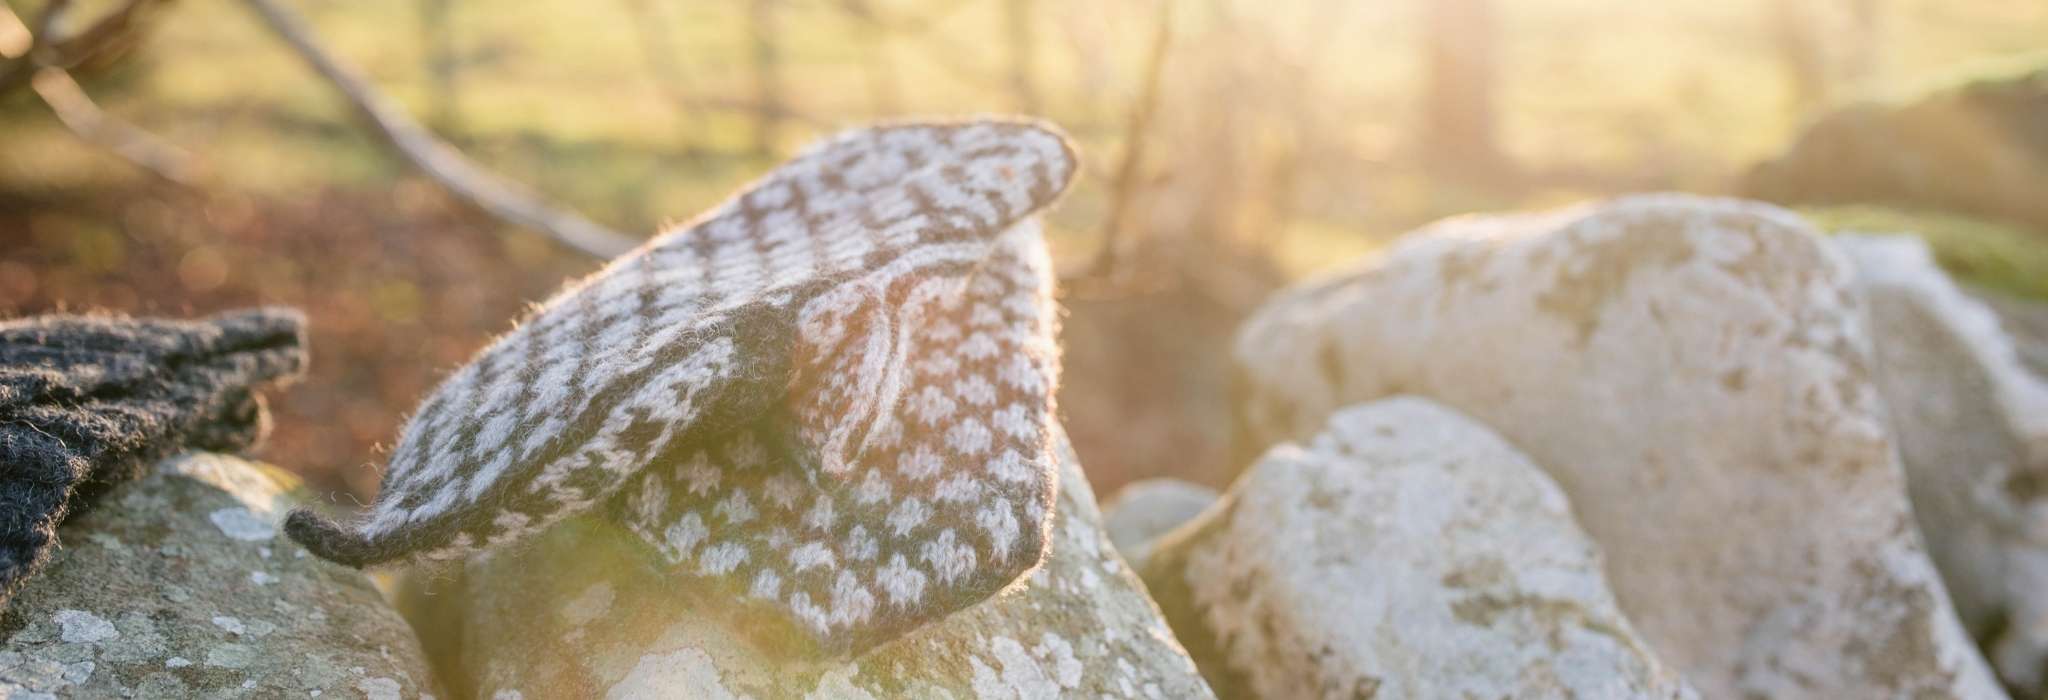 A pair of dark and cream colourwork mittens lie on top of each other, overlapping. They are draped on the top of a stone wall, with trees and a sunset out of focus behind.